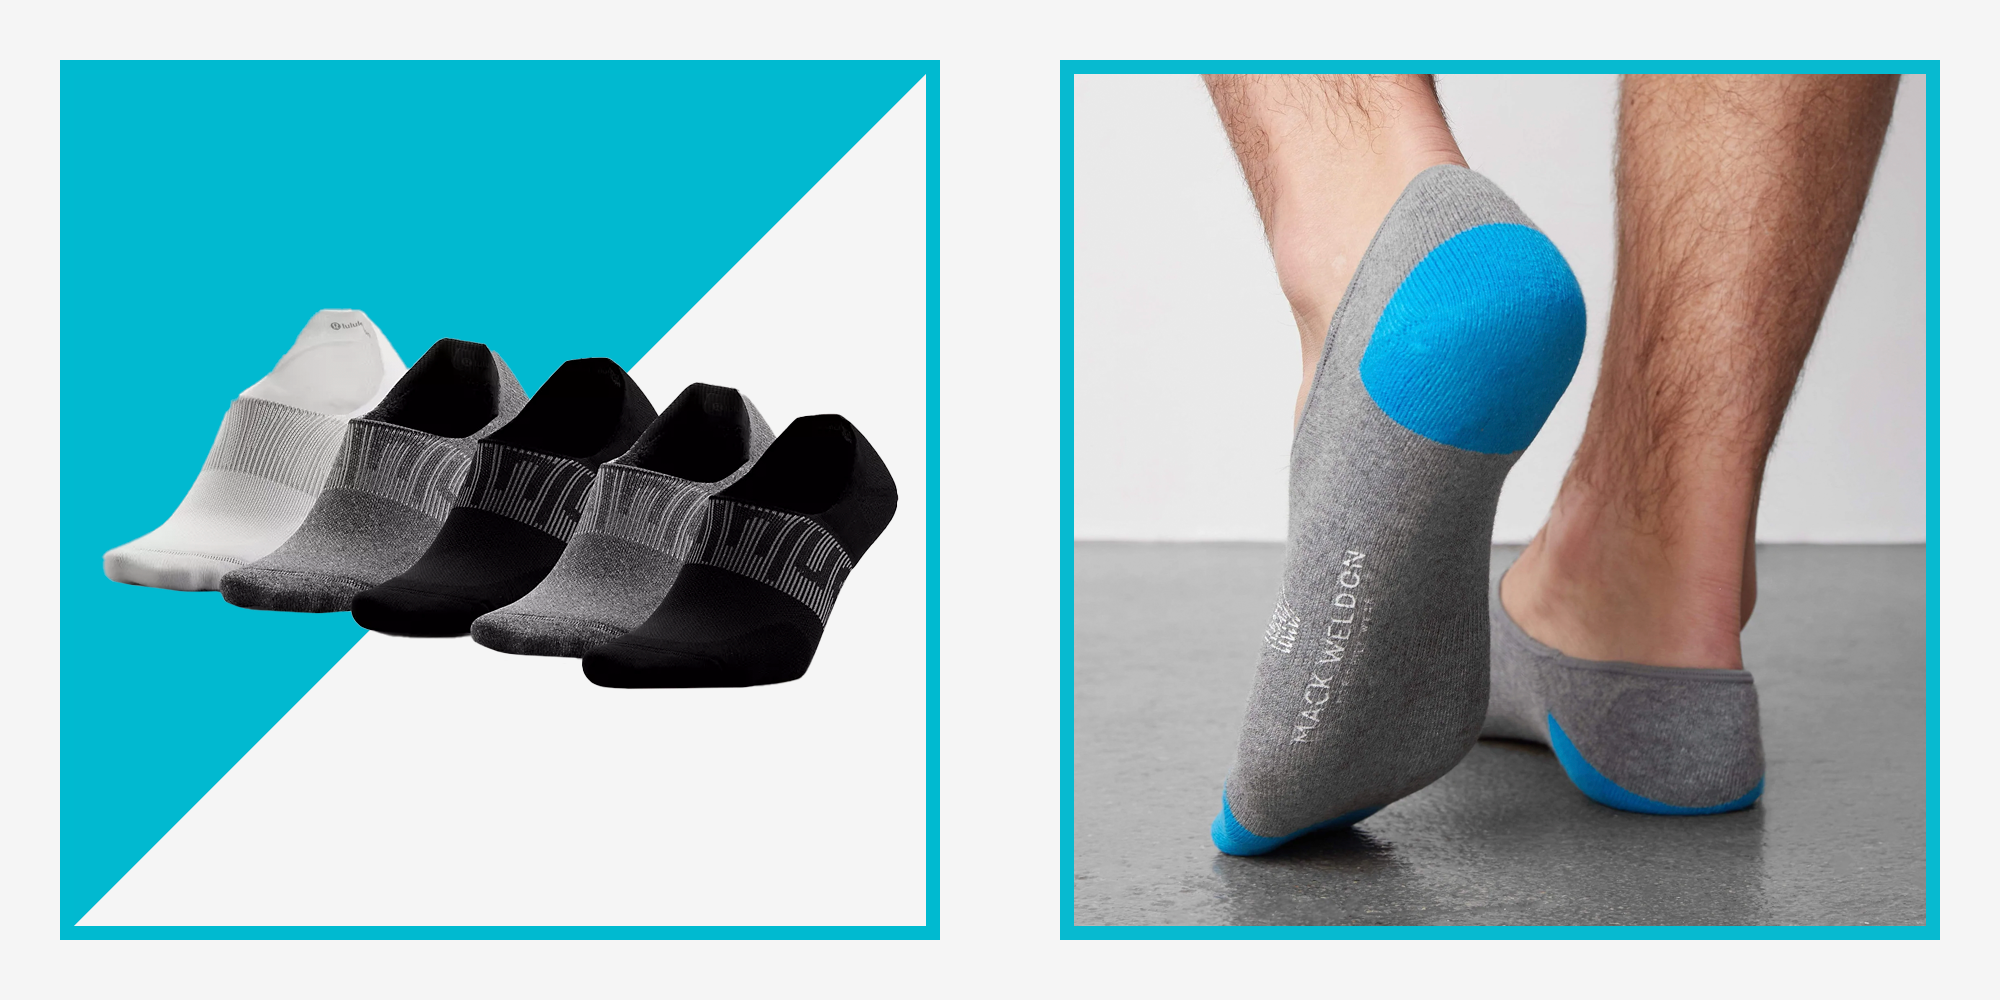 15 No-Show Socks That Actually Feel Good and Won't Slip